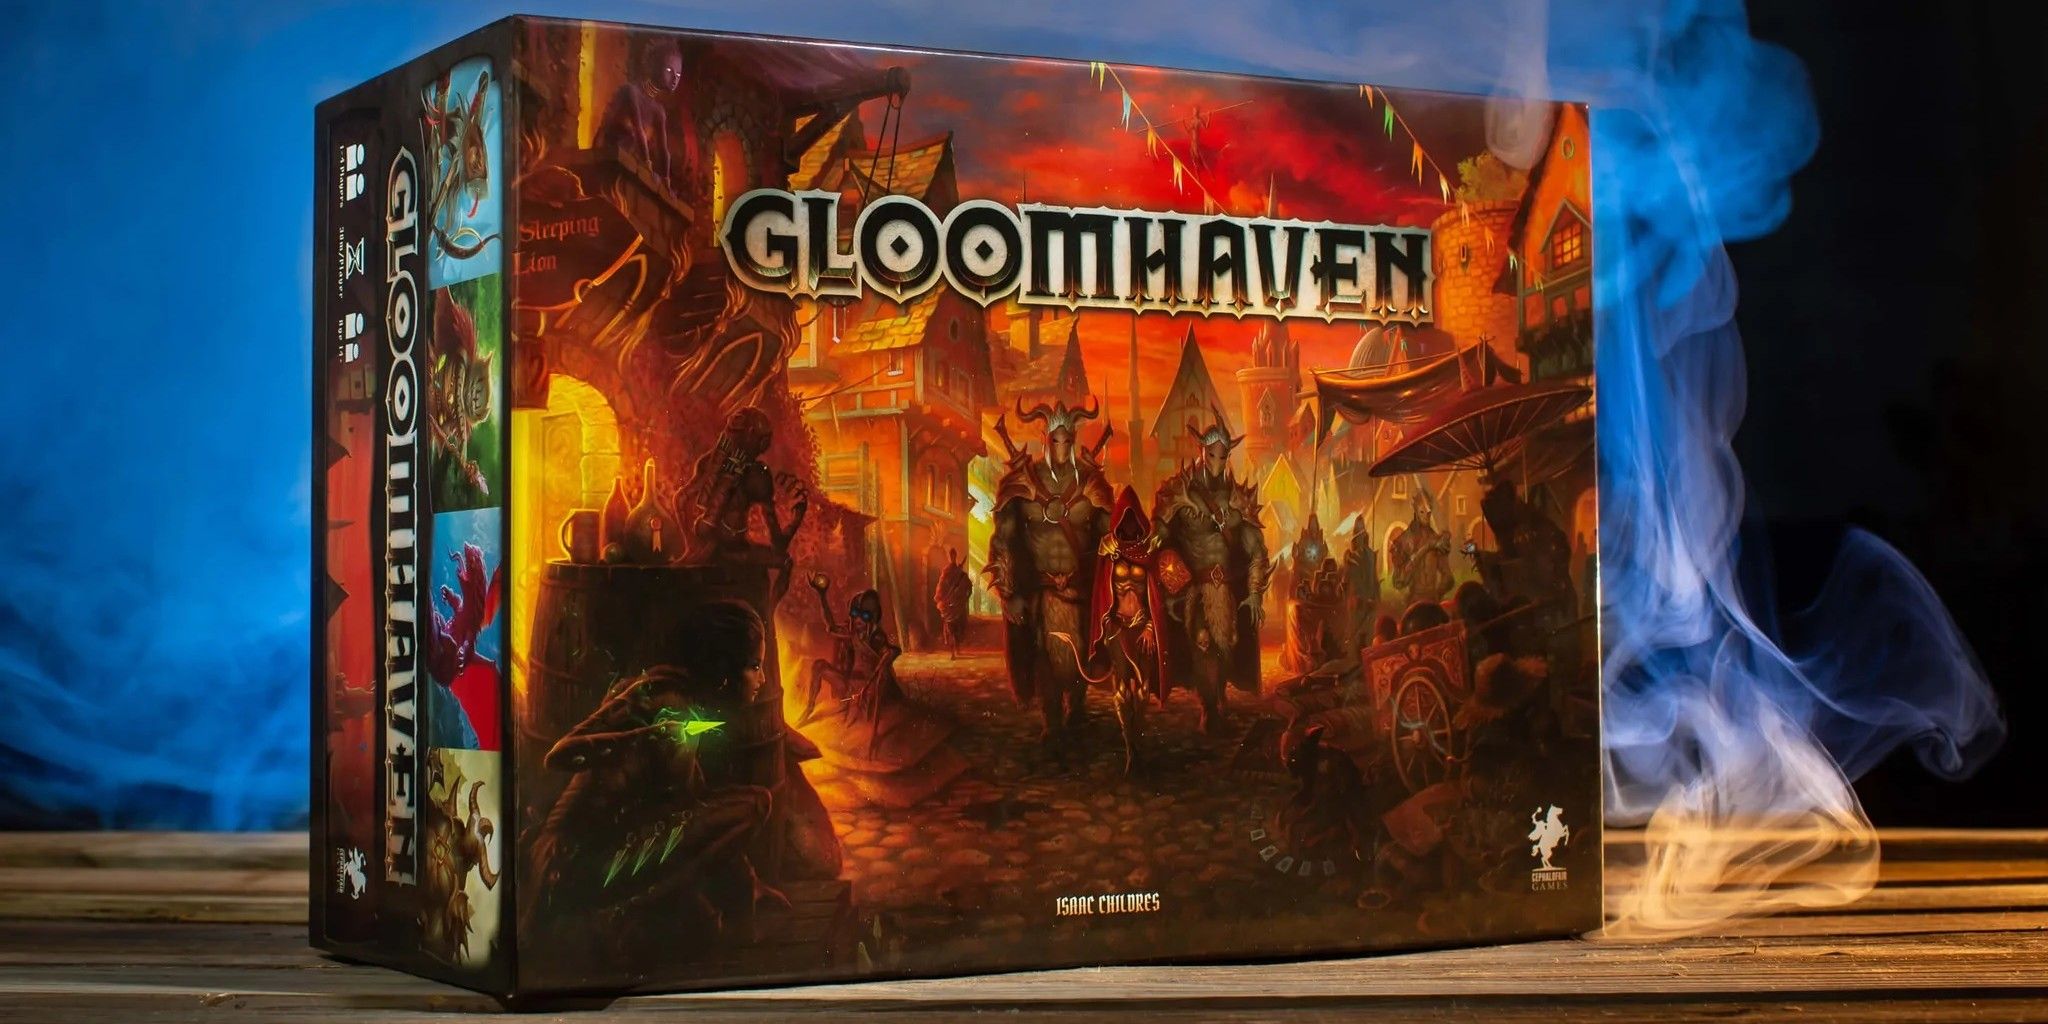 The box for the board game Gloomhaven